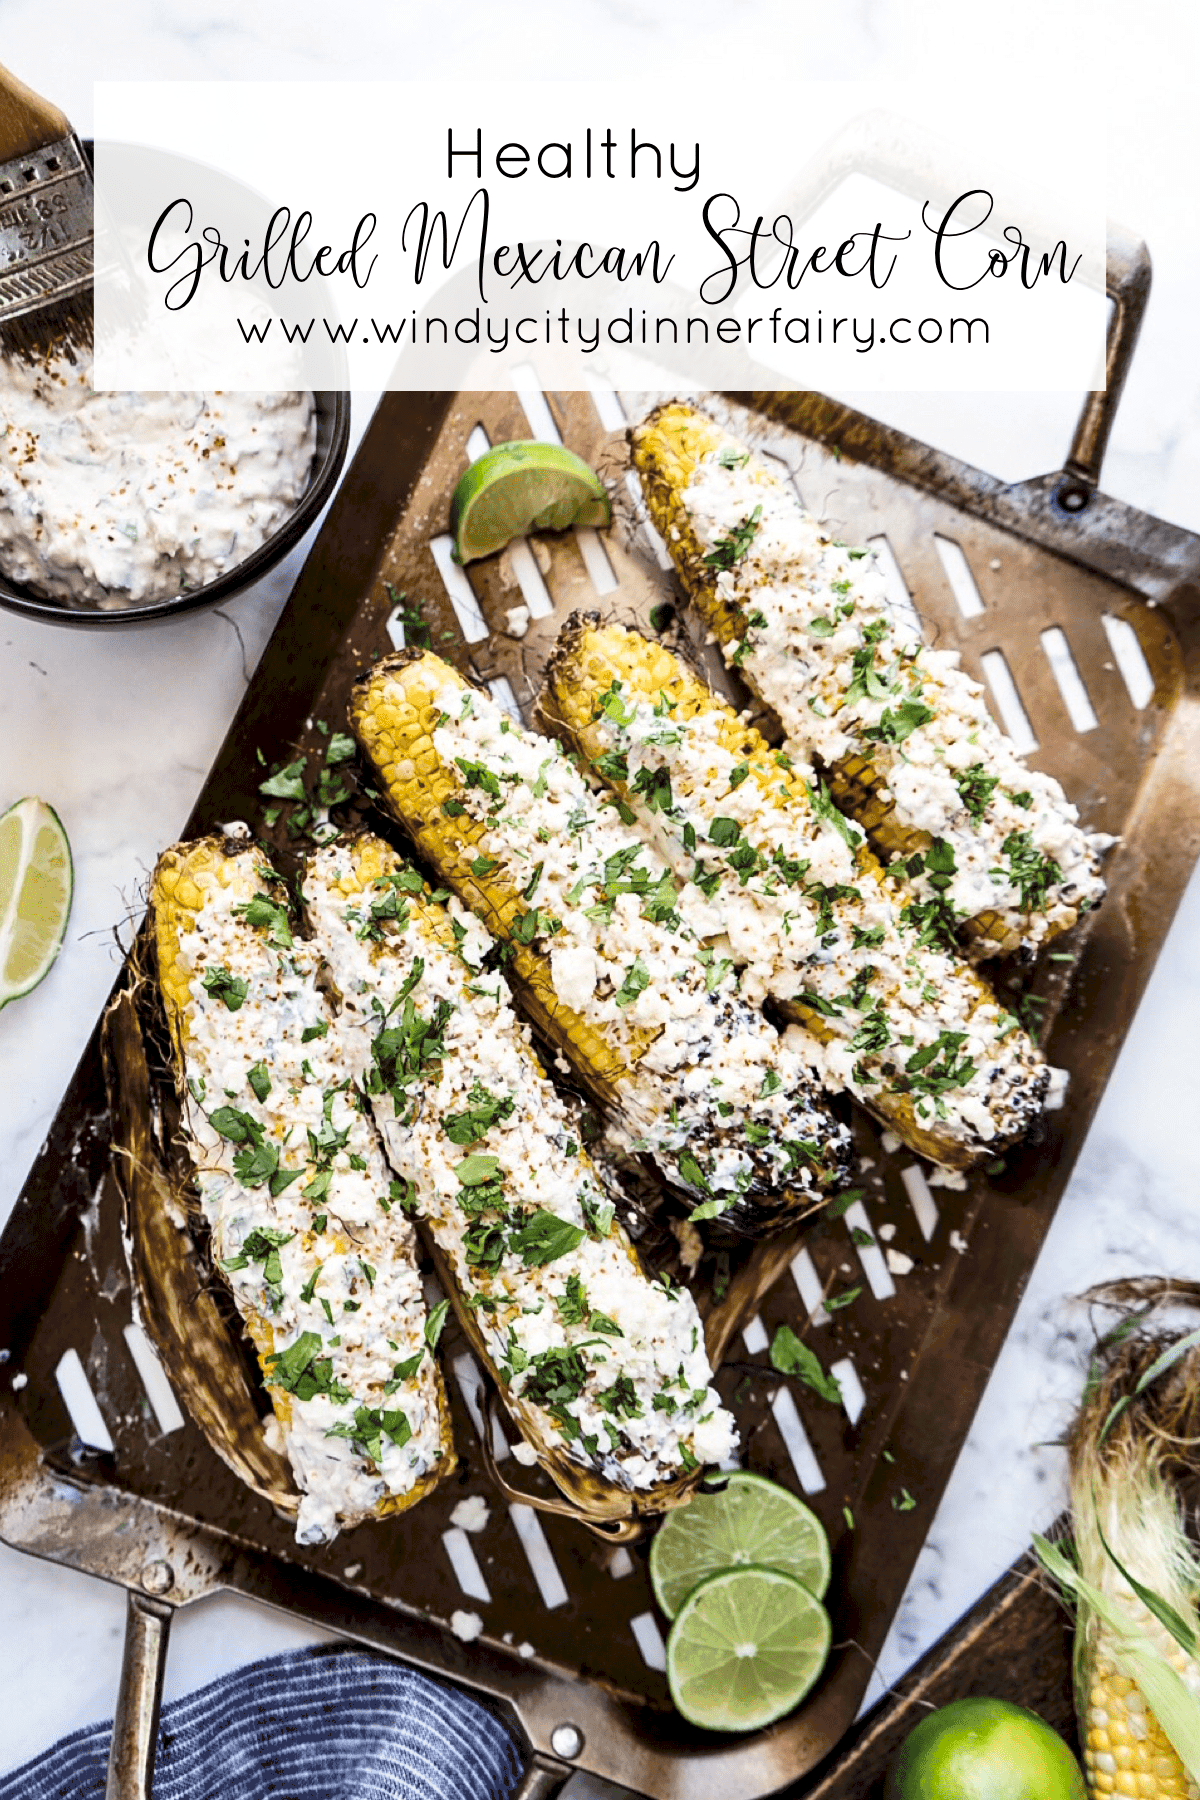 Healthy Grilled Mexican Street Corn